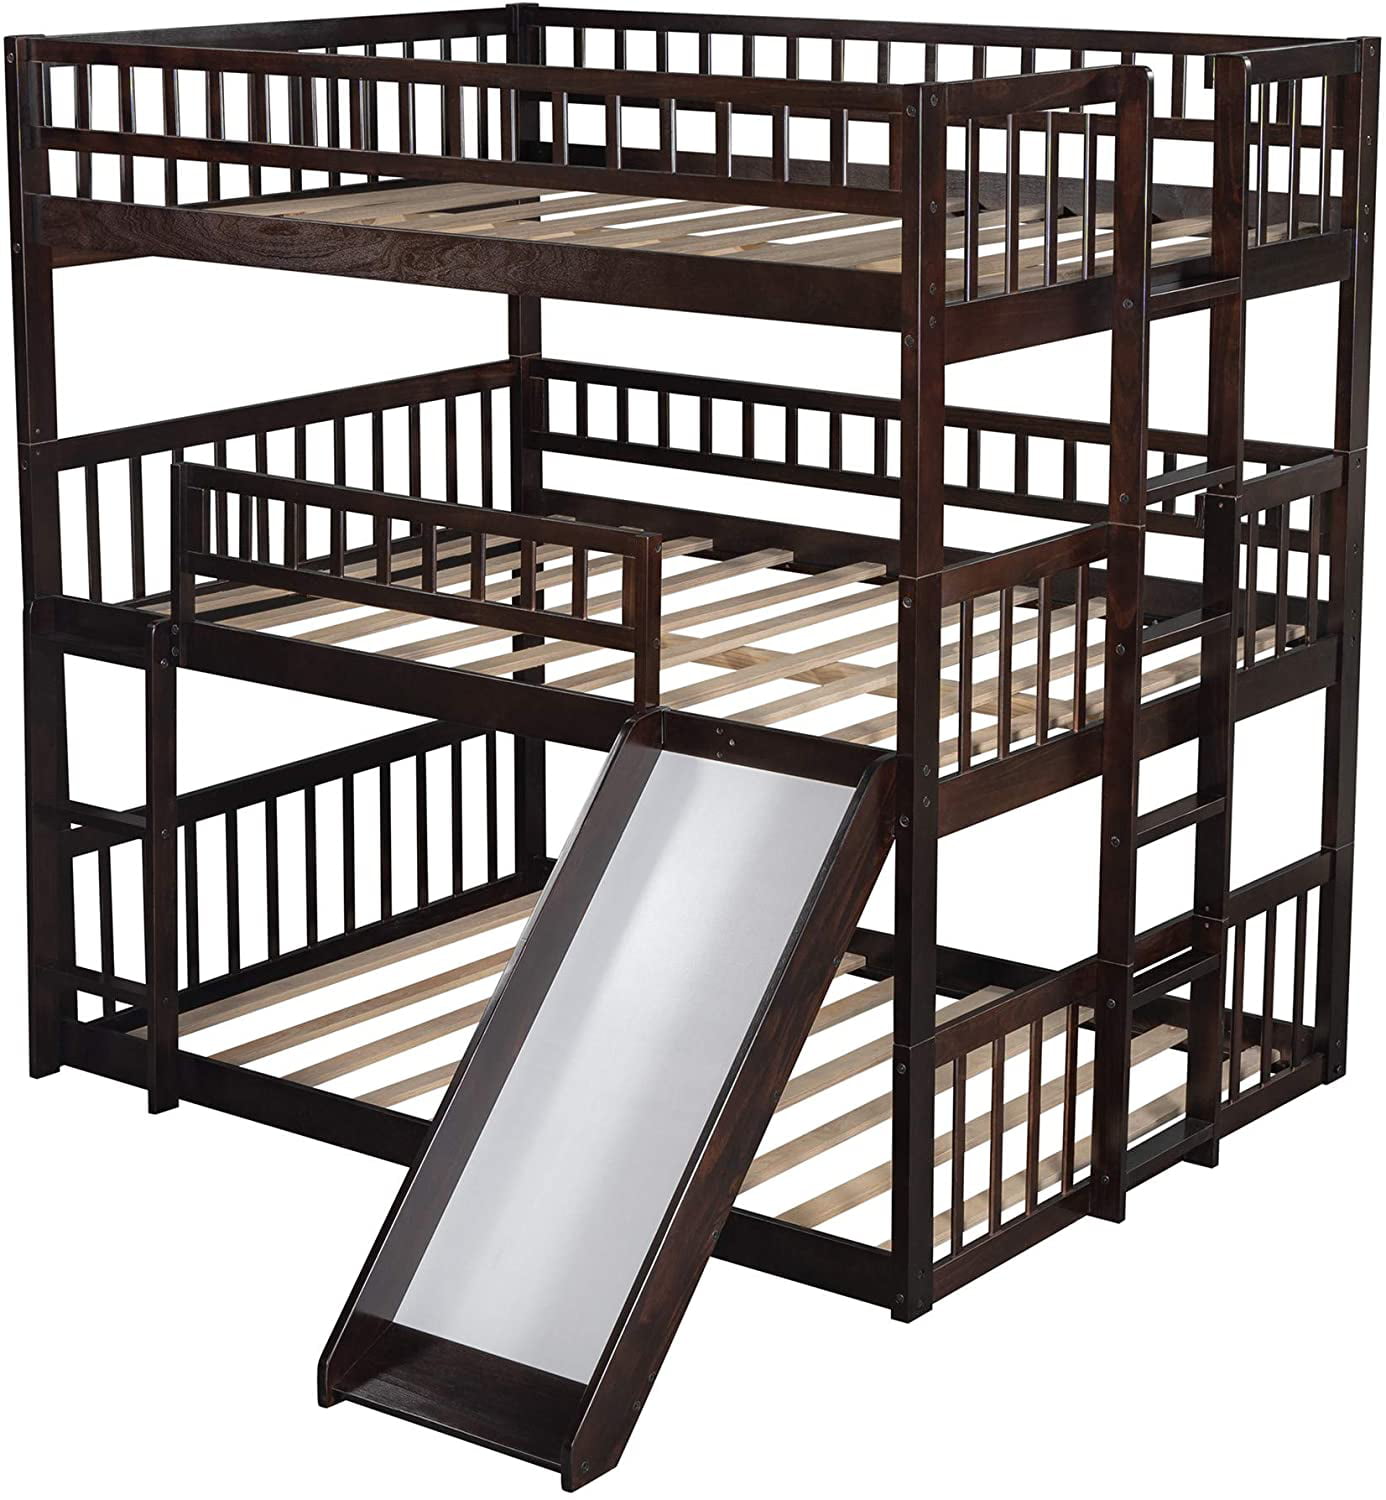 Strong Wooden Construction Bed Frame, Triple Bunk Bed Frame